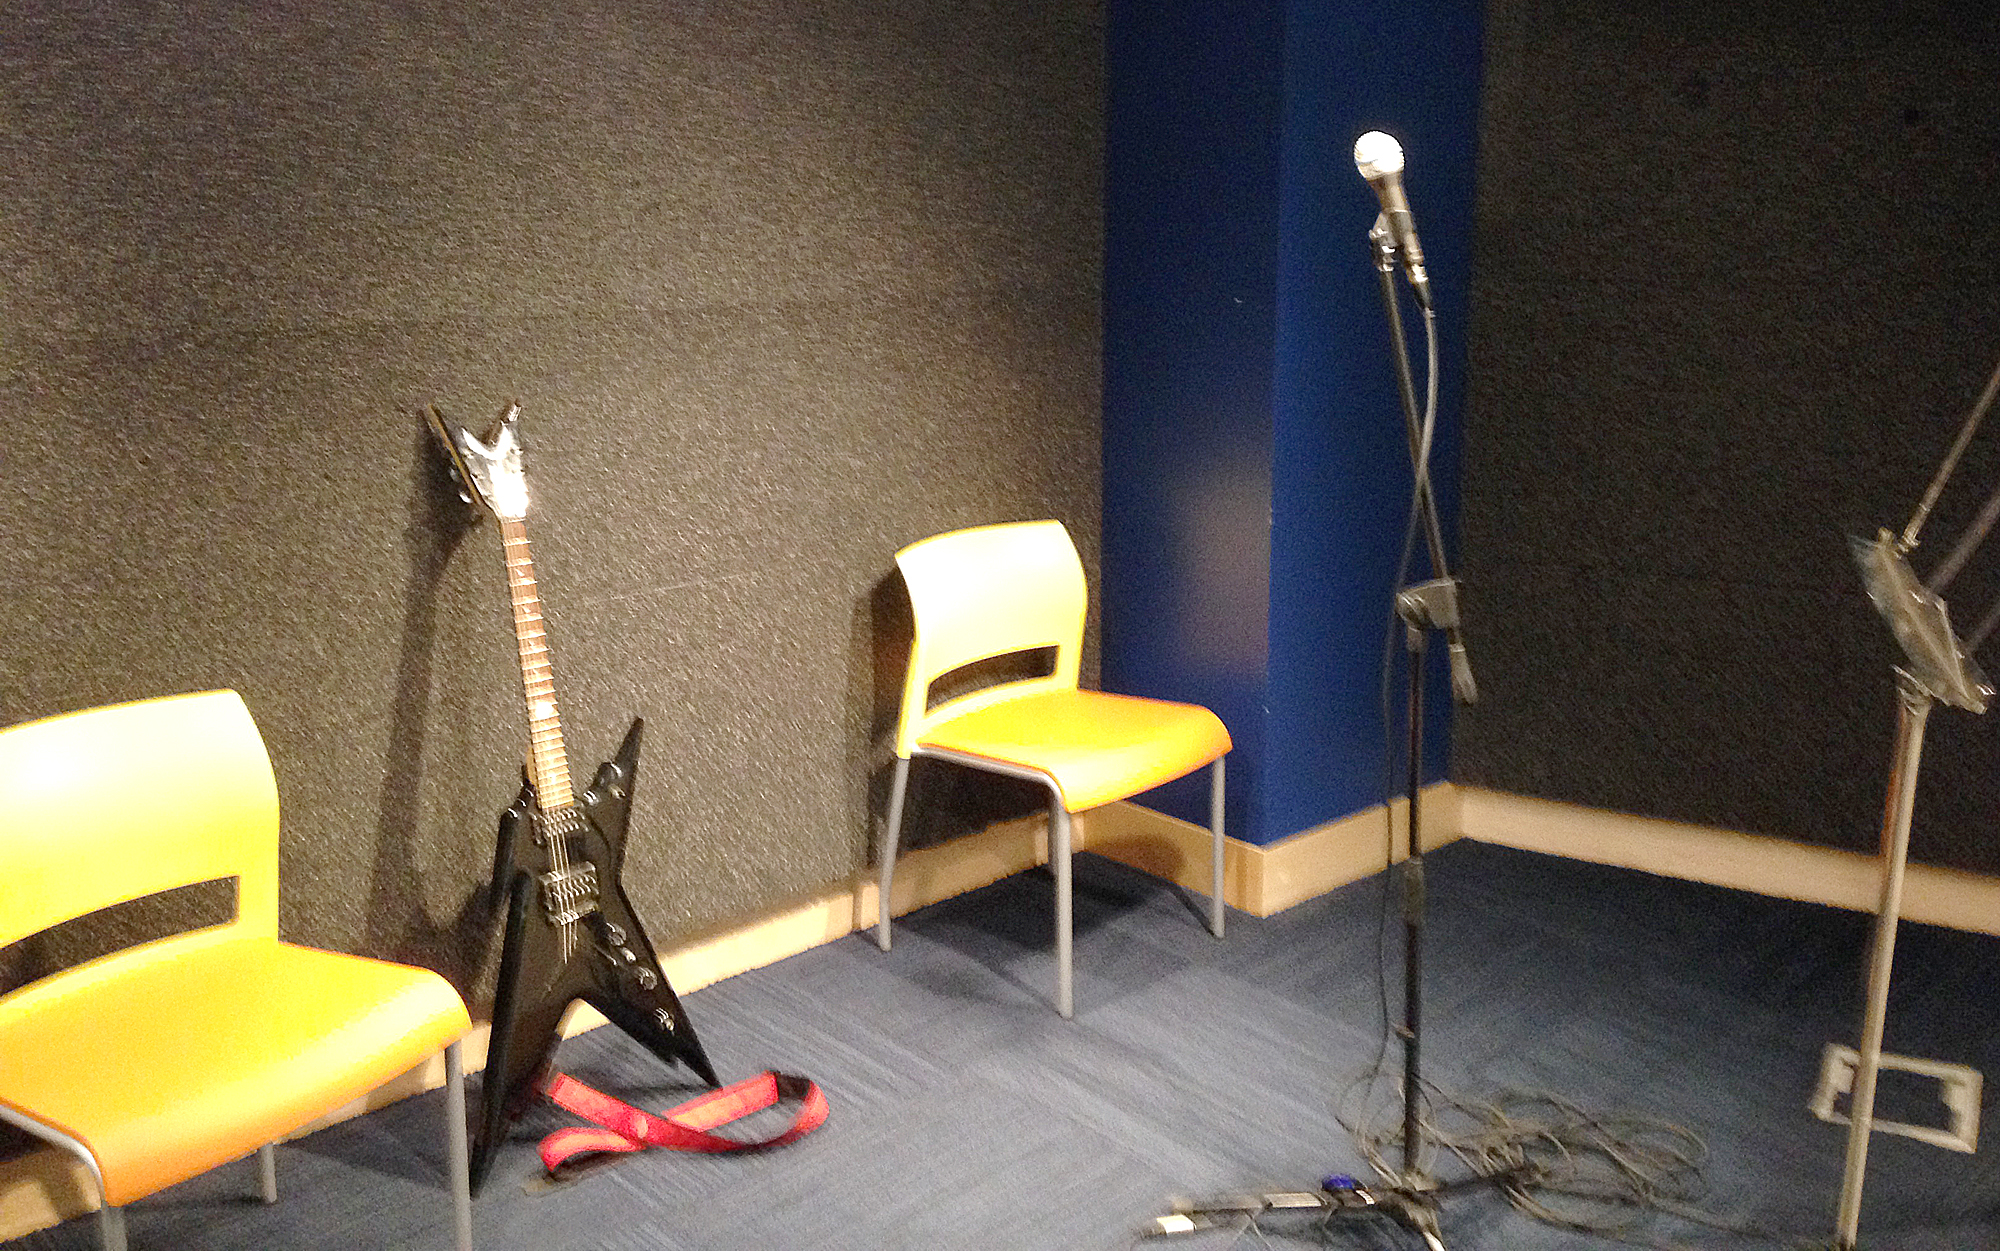 a microphone and a guitar near two chairs